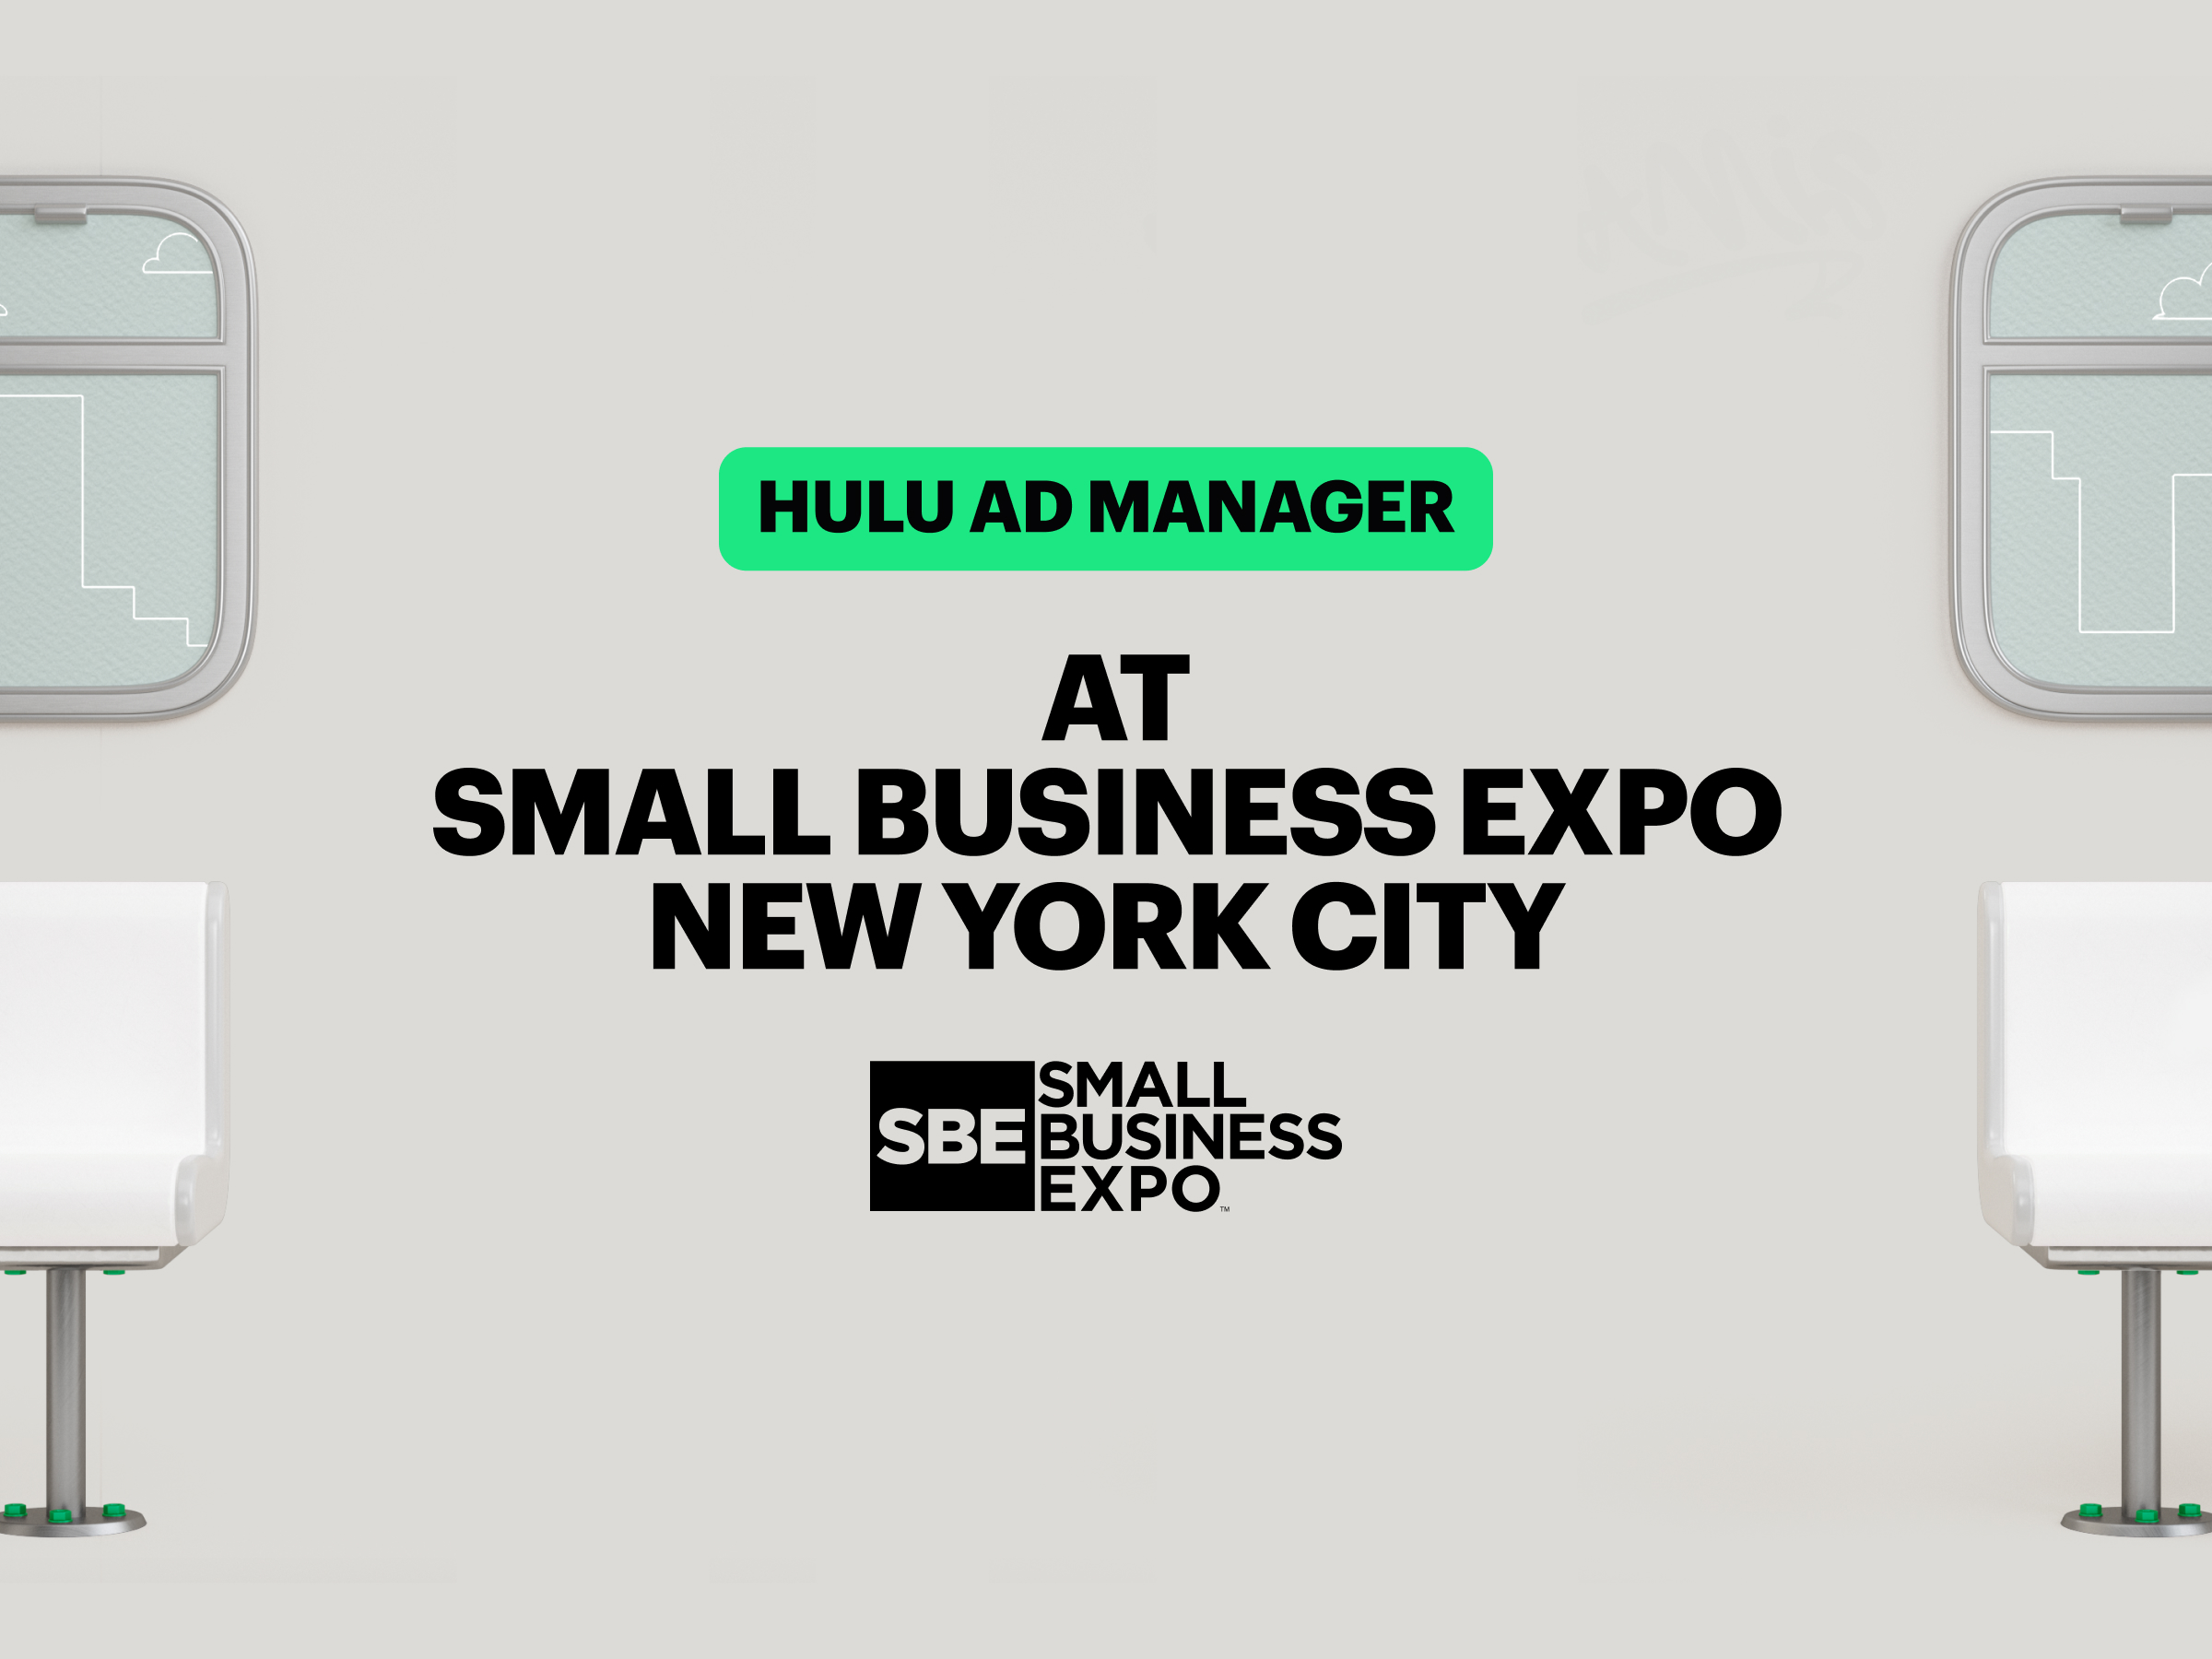 Hulu Ad Manager Small Business Expo New York City